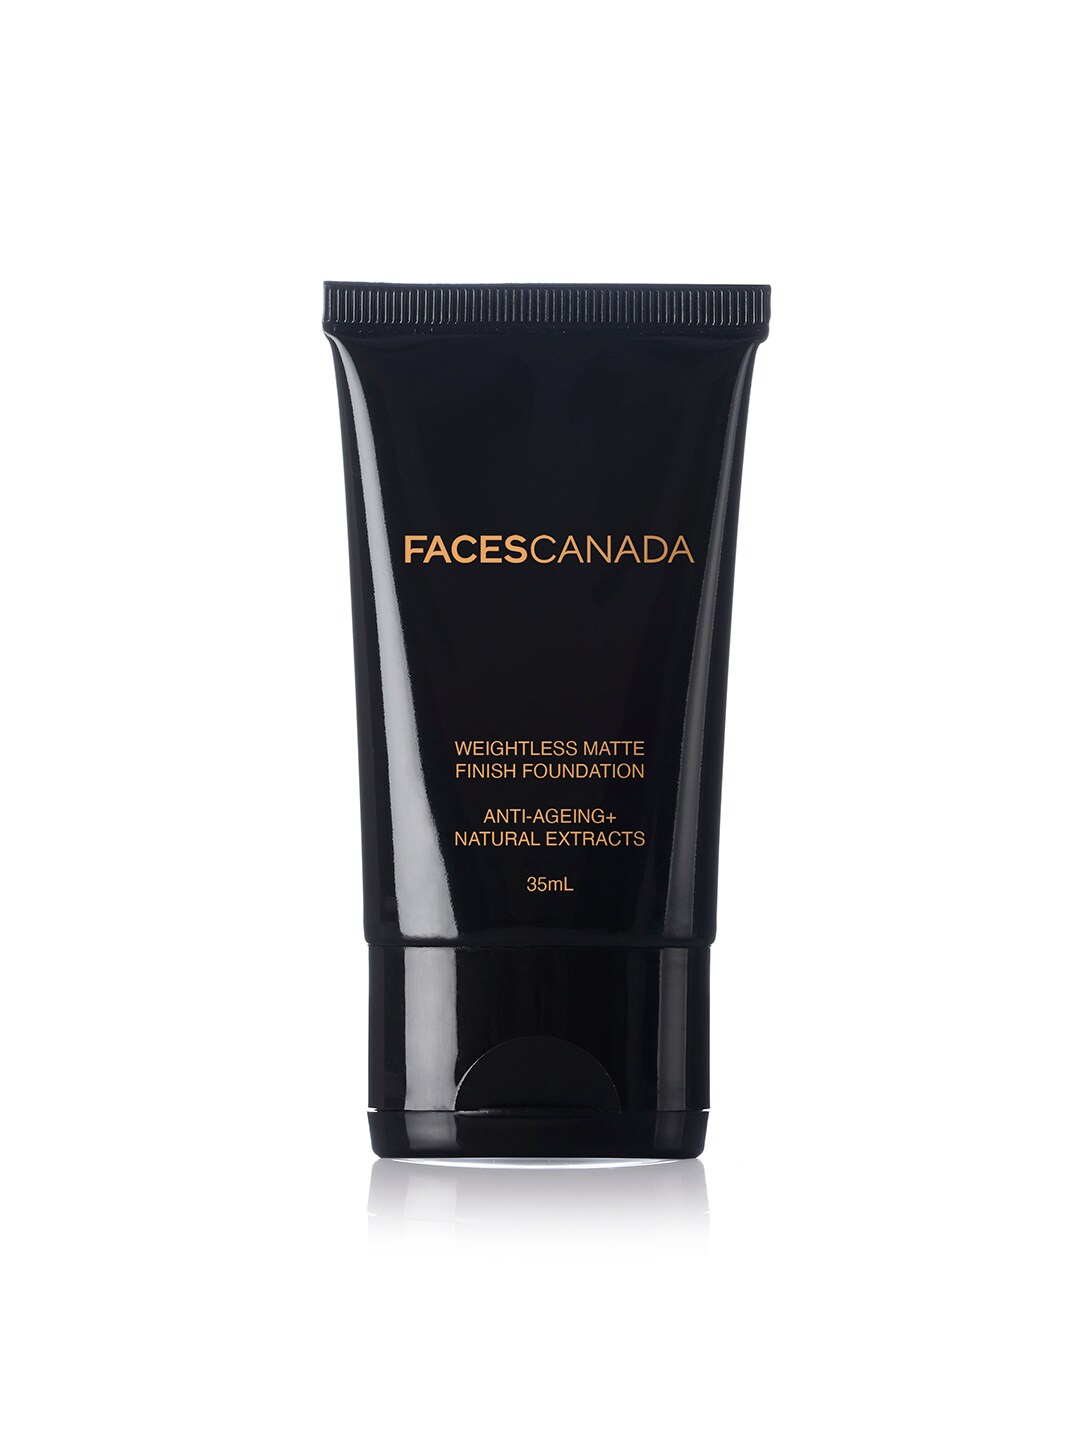 FACES CANADA Weightless Matte Finish Foundation 35ml - Natural 02 Price in India